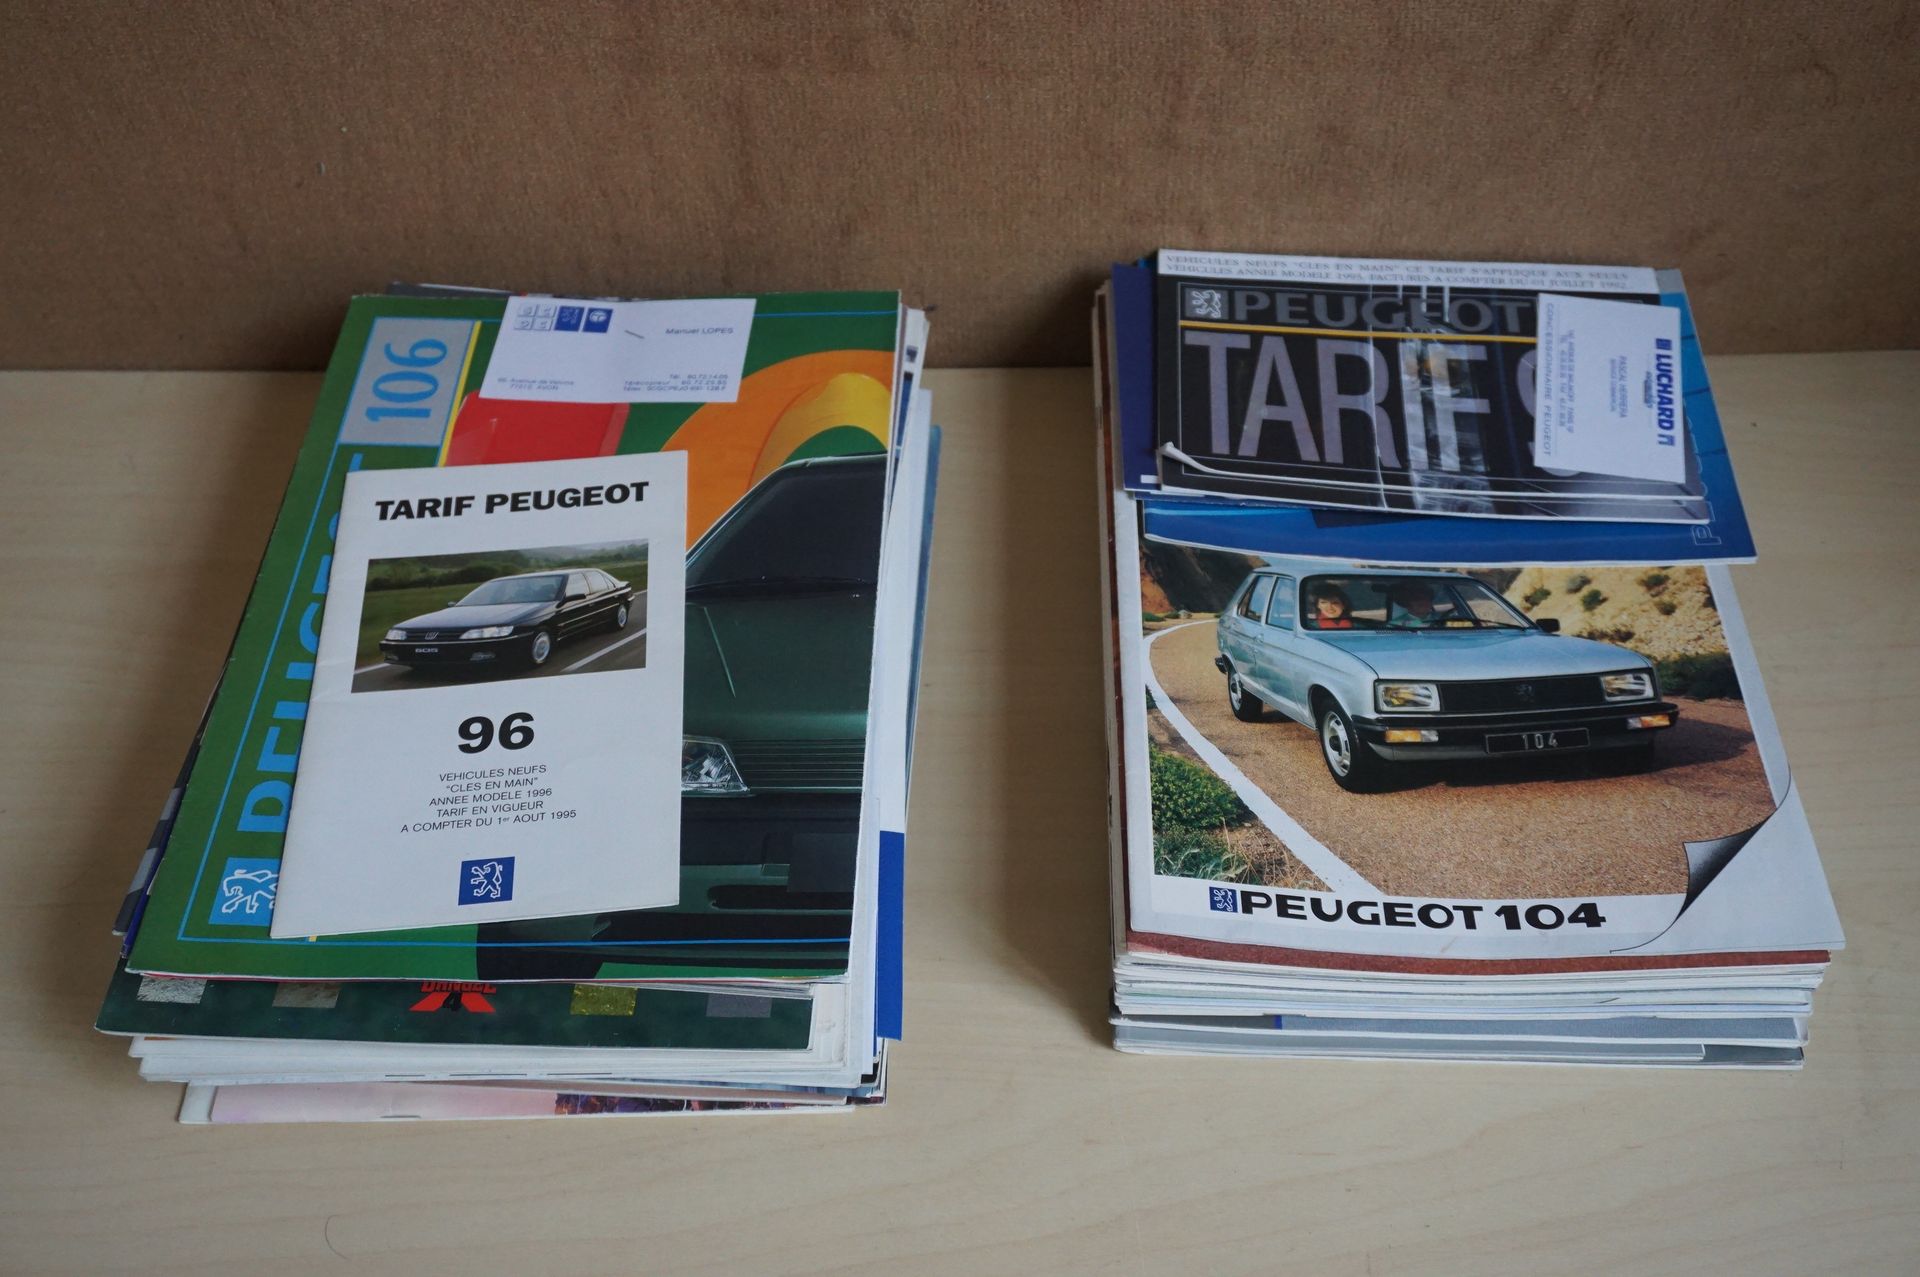 Null Batch of catalogs of peugeot dealership and
booklets of price lists